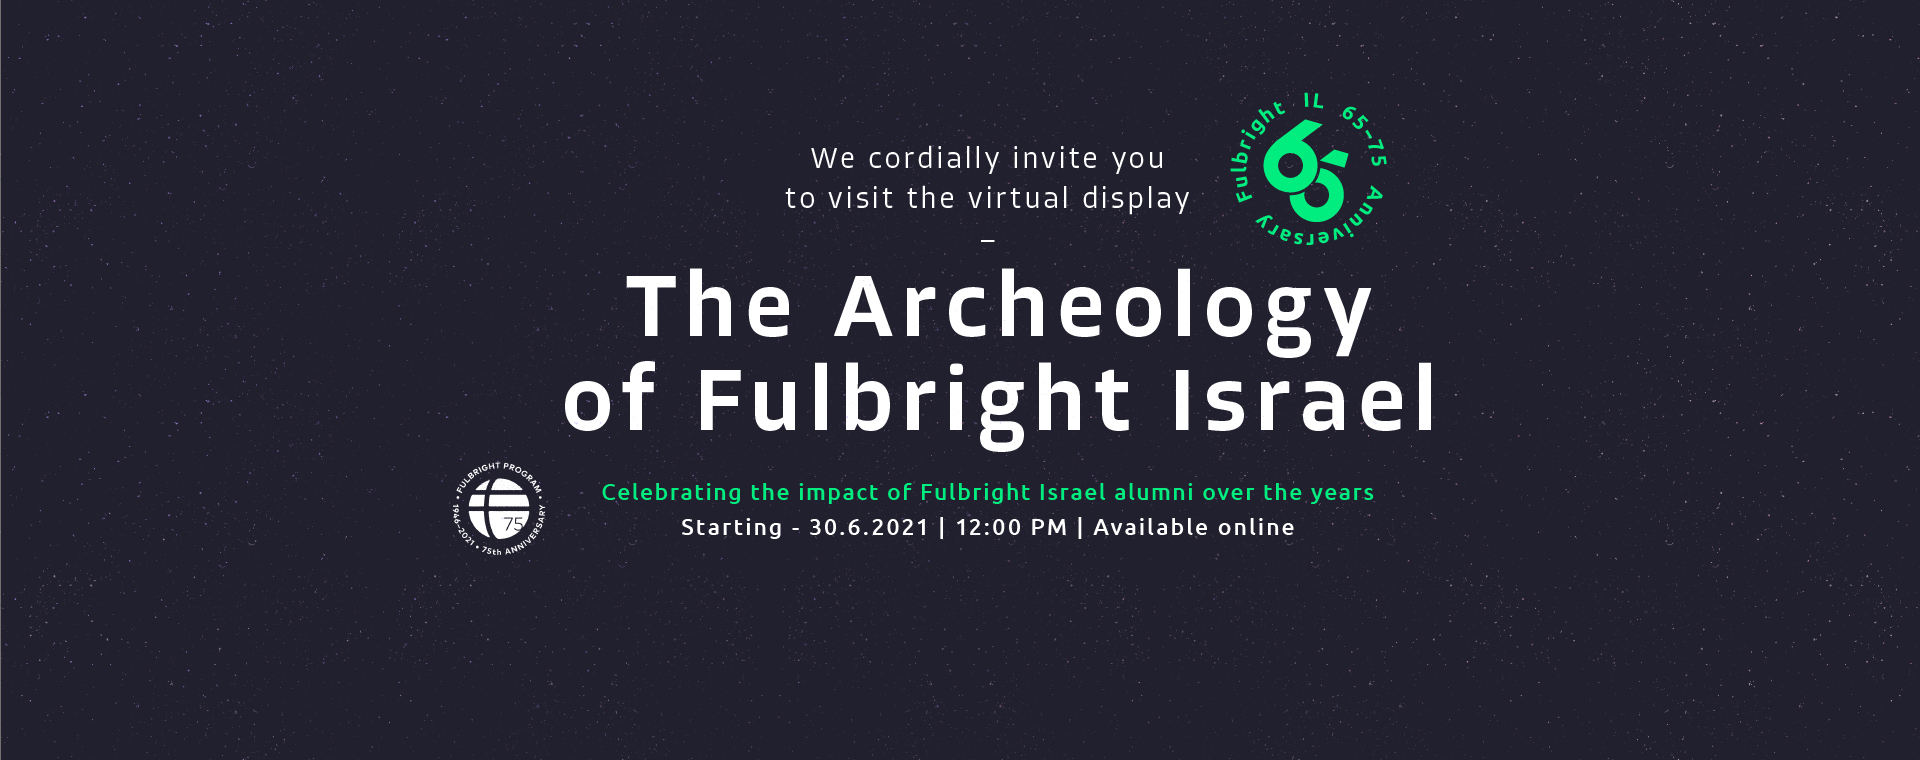 The Archeology of Fulbright Israel 